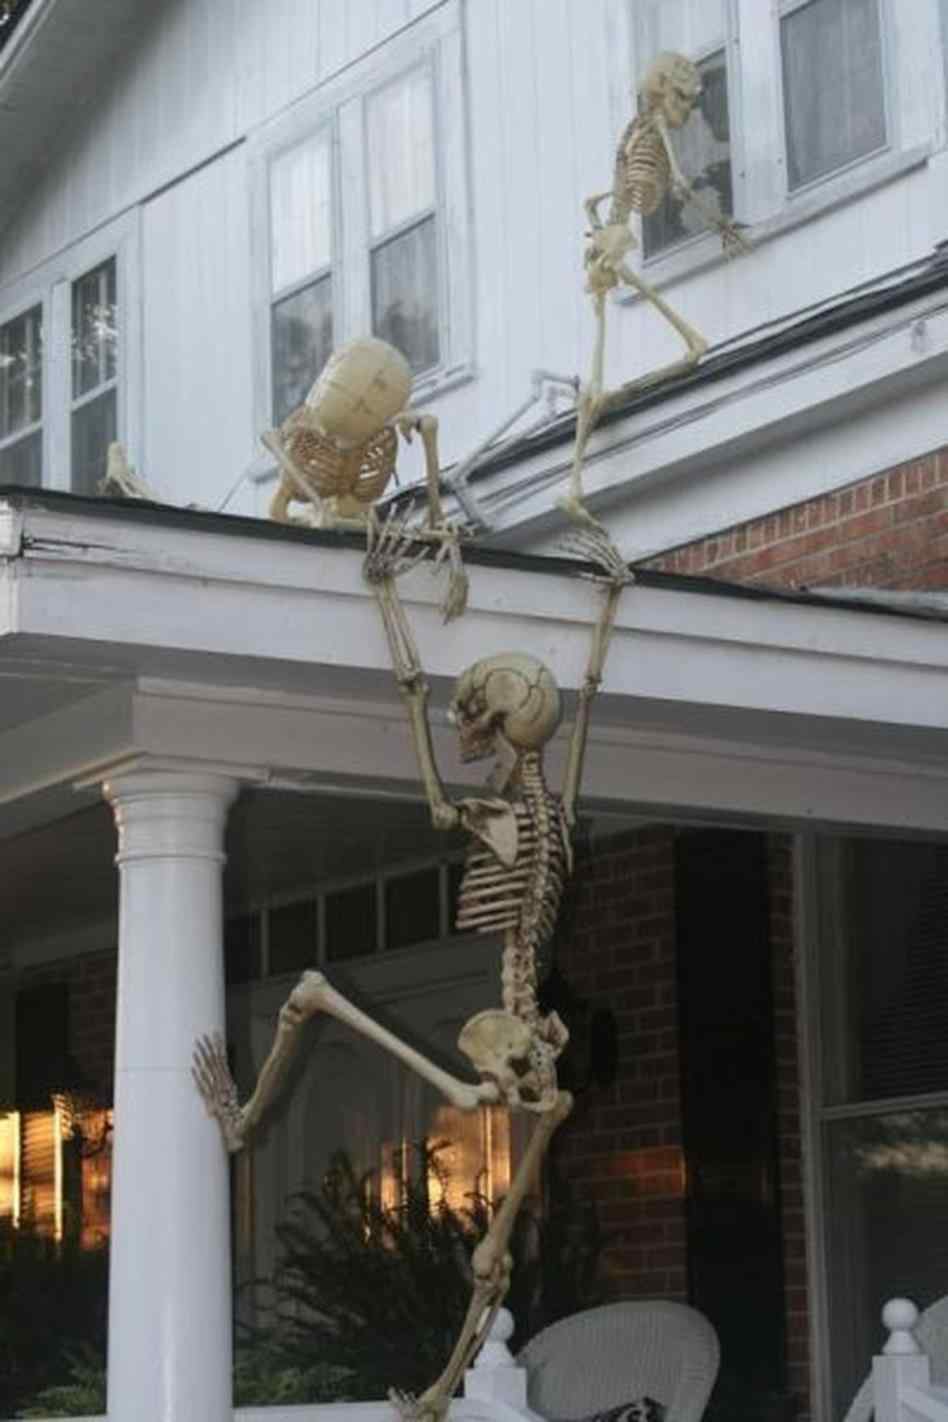 To Greet Your How Step Up Stair Risers With Wallpaper - Funny Skeleton Halloween Decoration Ideas , HD Wallpaper & Backgrounds